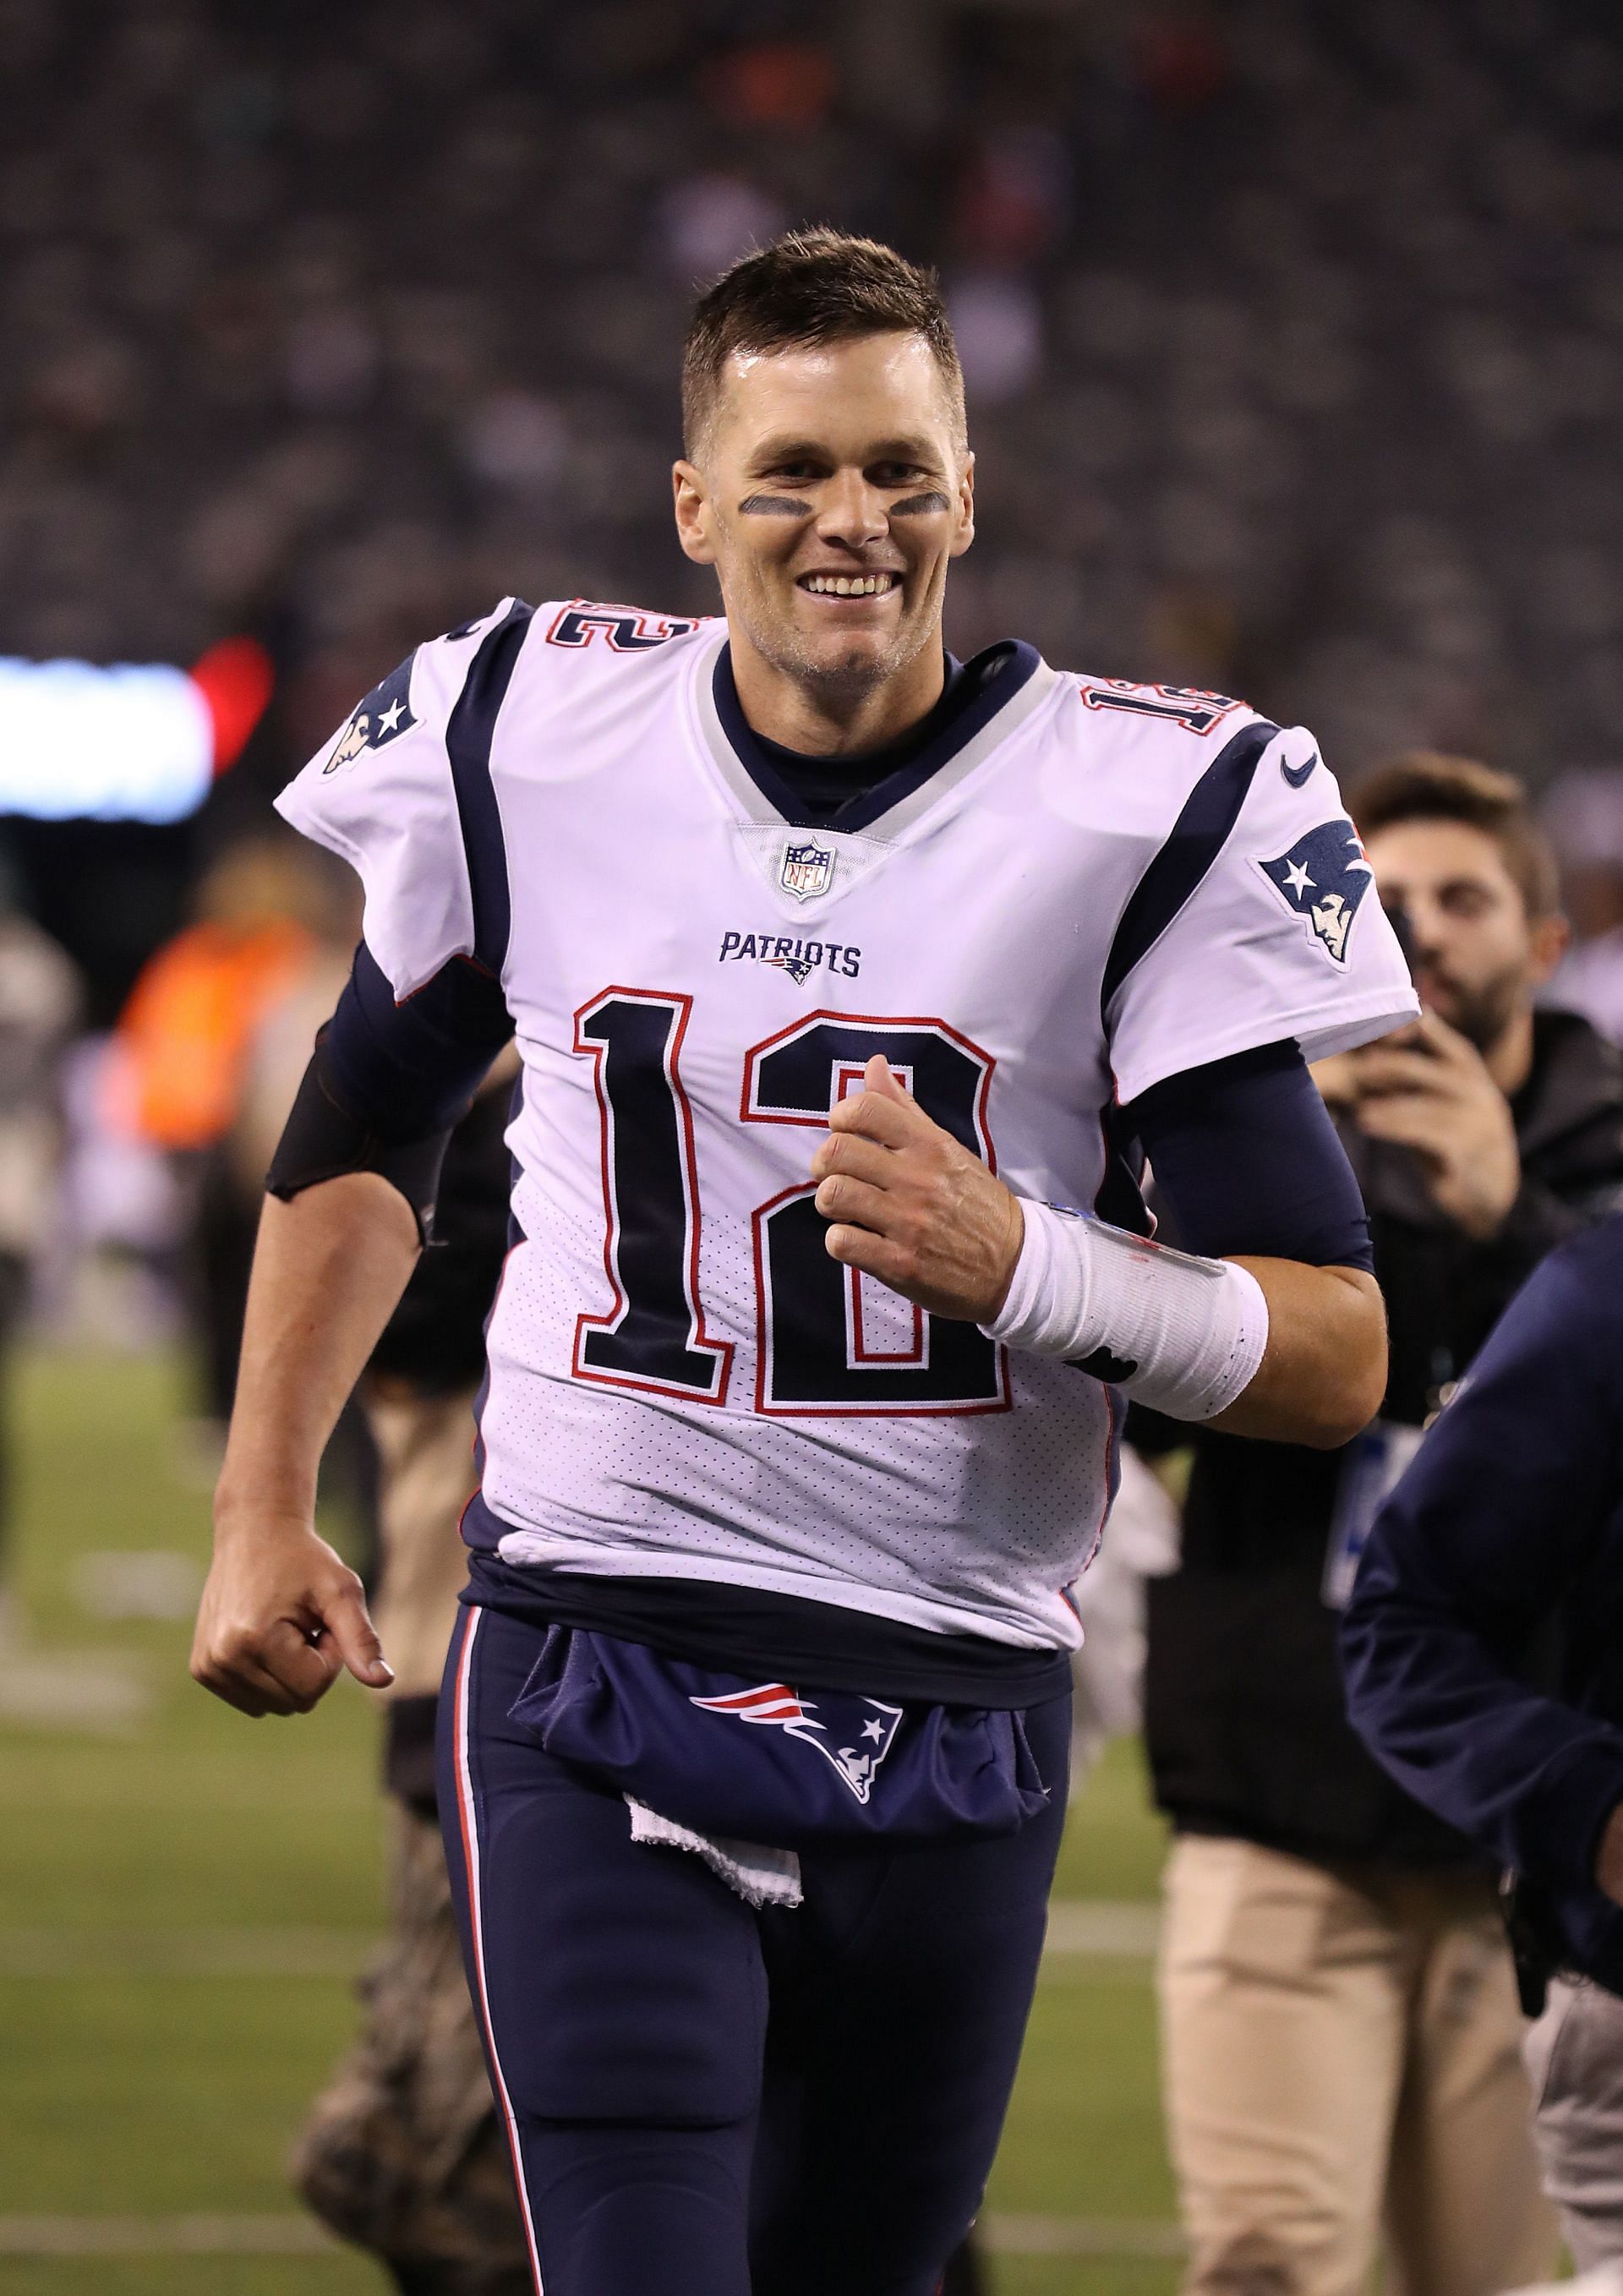 The QB, while with the New England Patriots